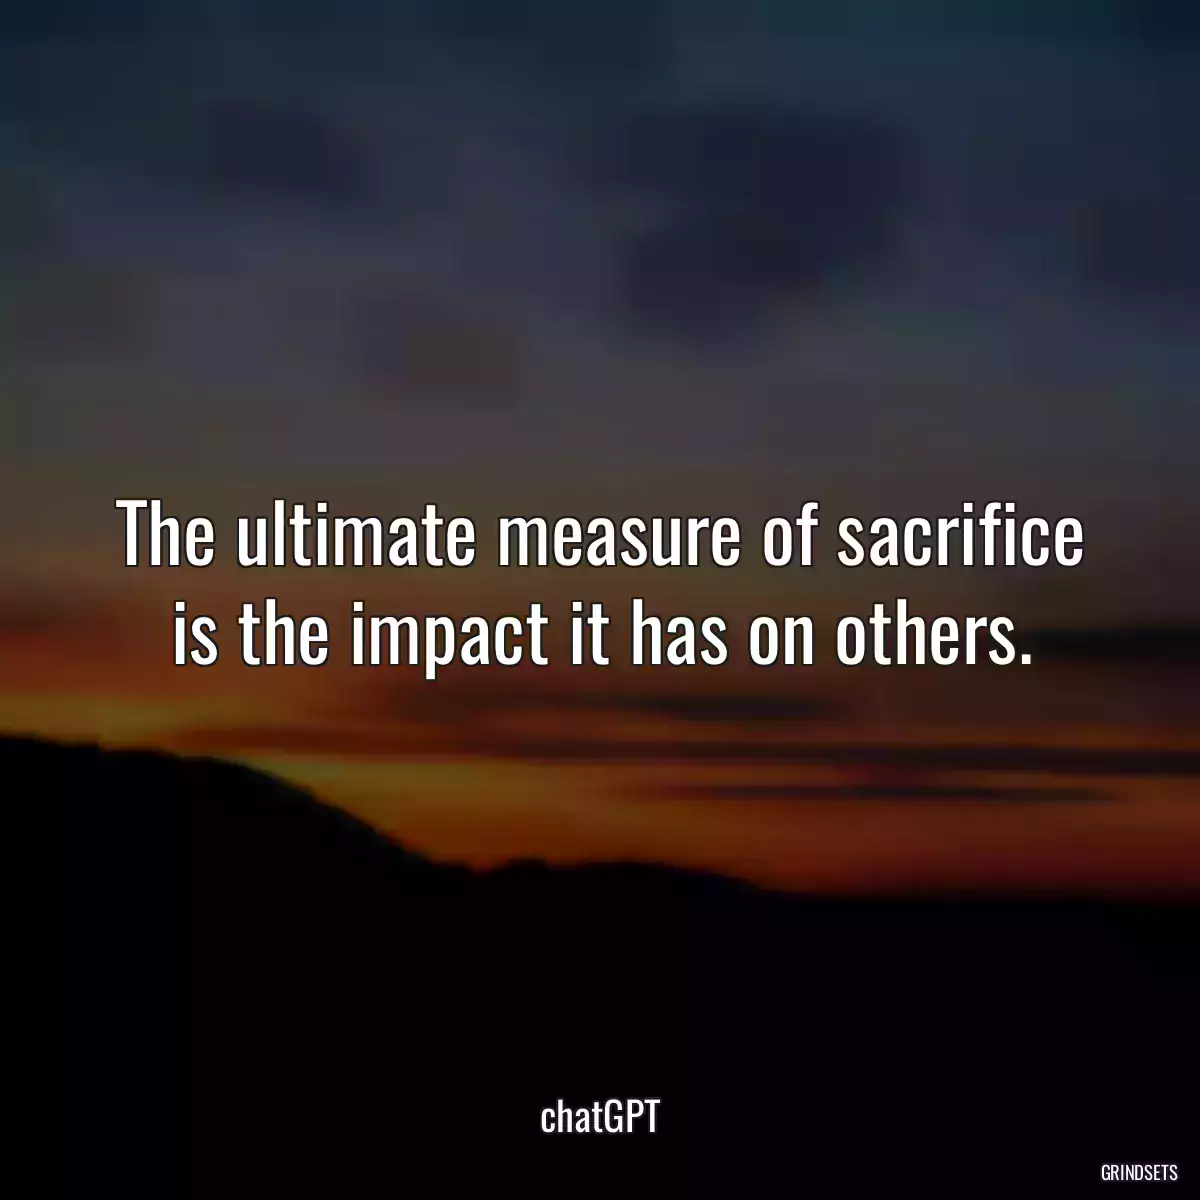 The ultimate measure of sacrifice is the impact it has on others.